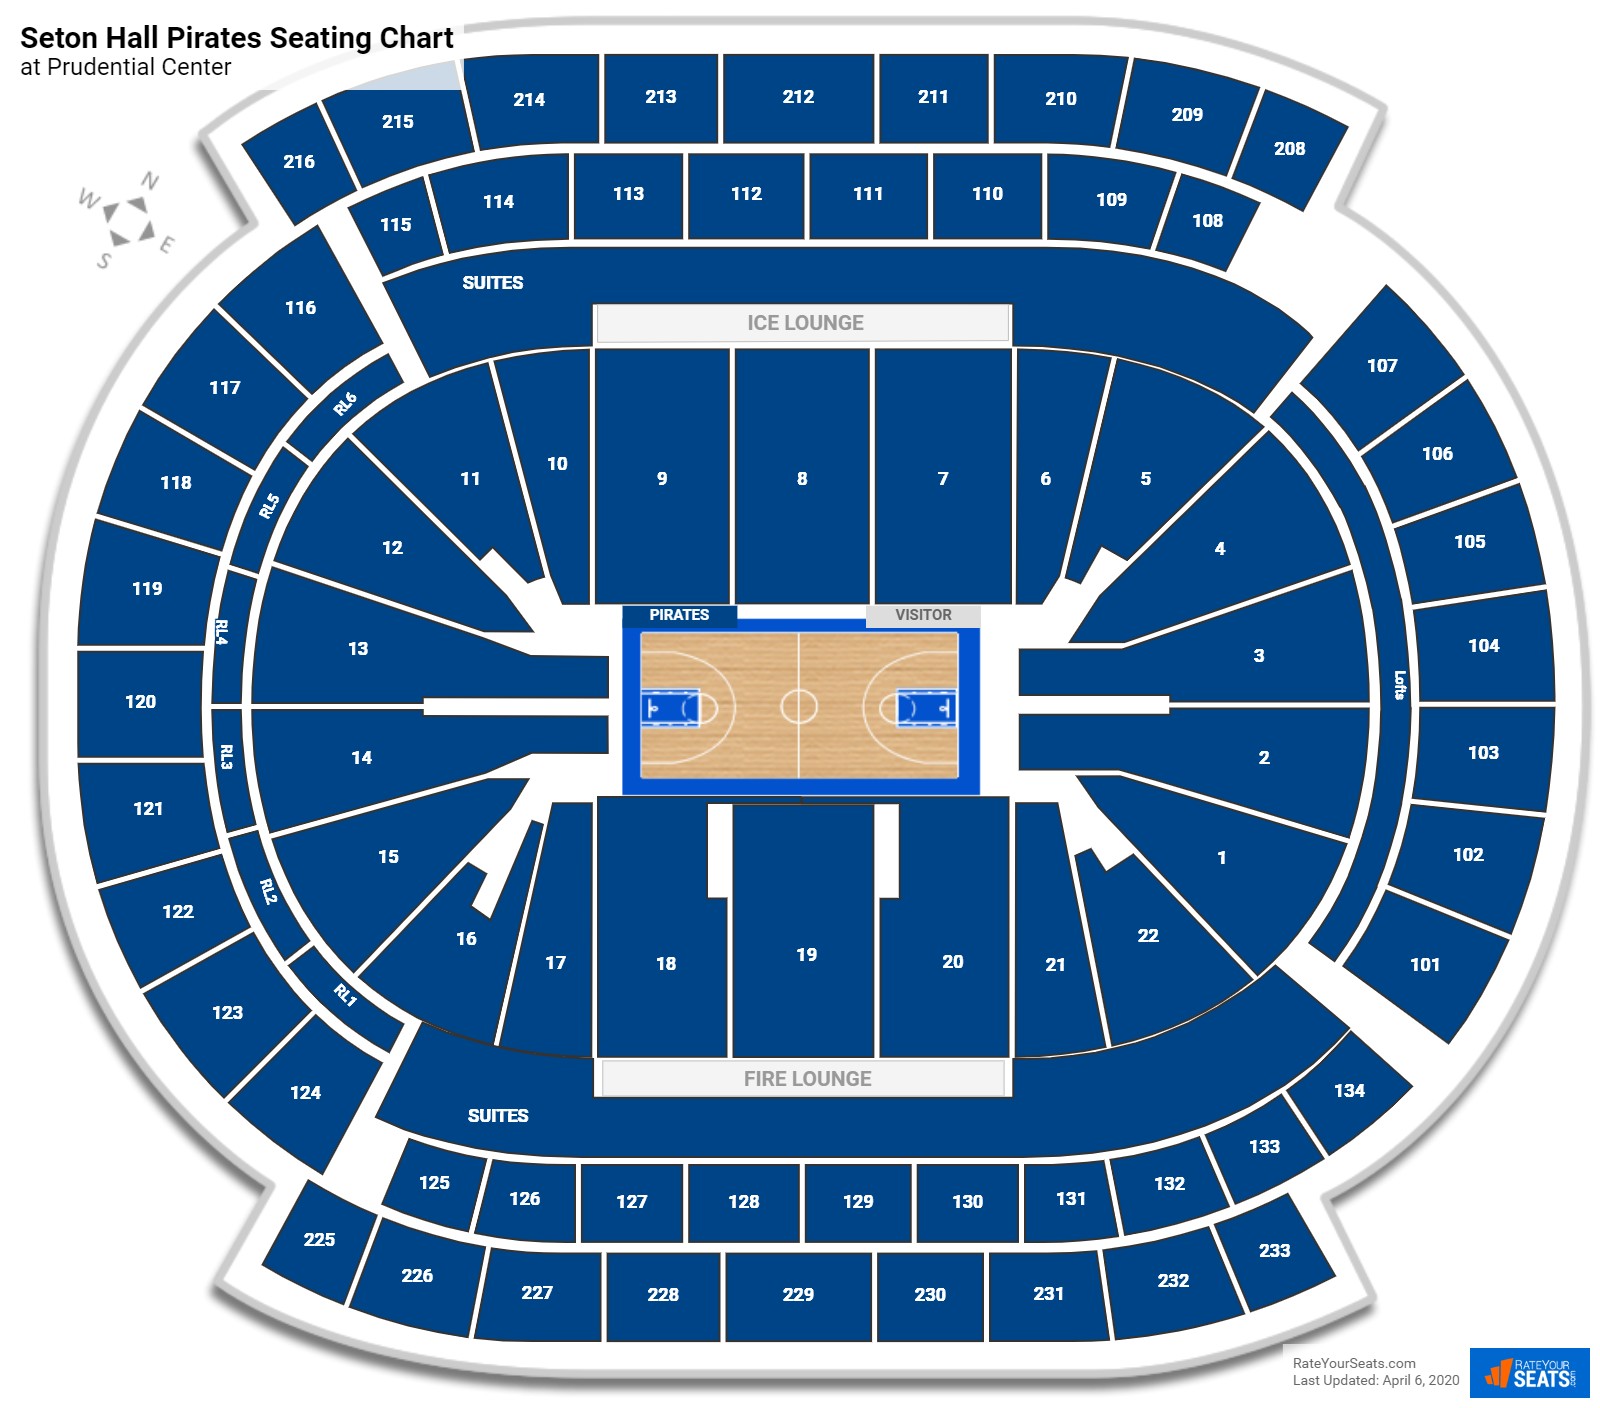 Prudential Center Seating Charts for Seton Hall Basketball